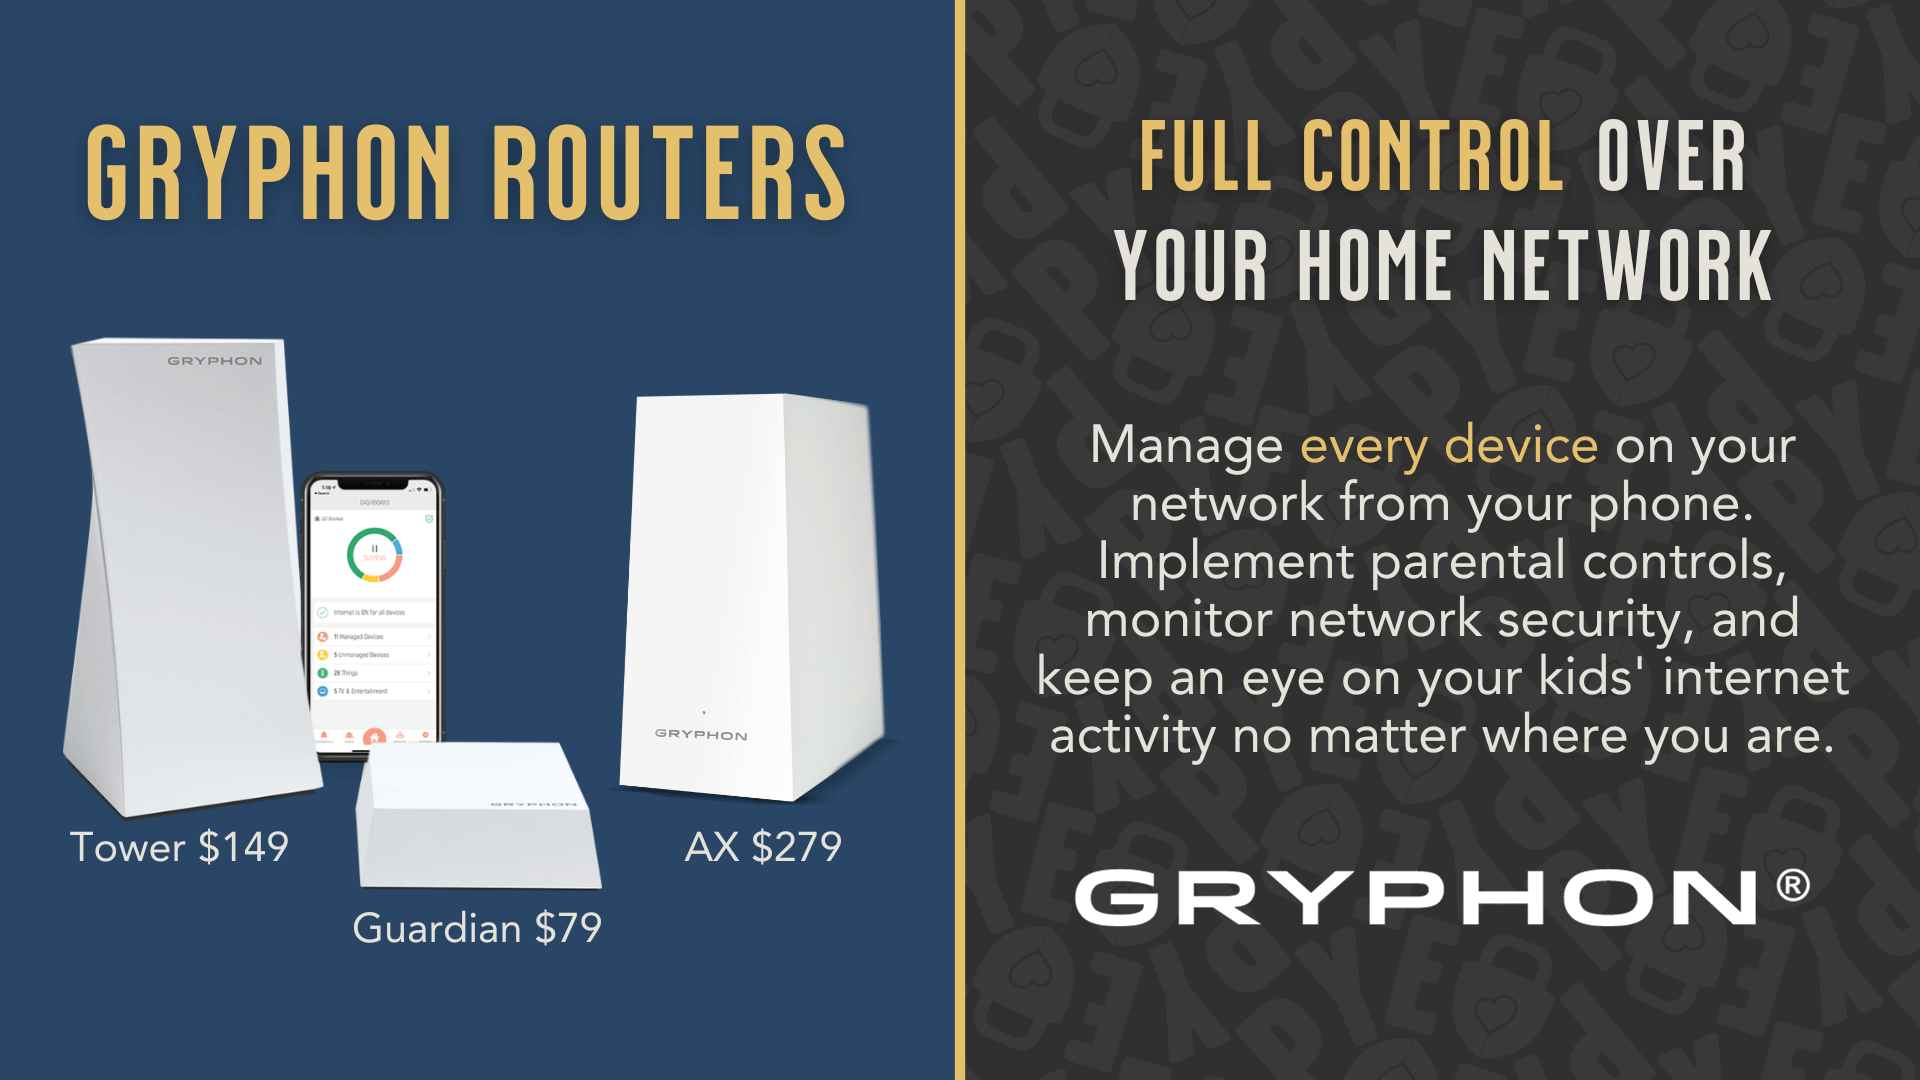 Gryphon Price Image for PYE Router Post